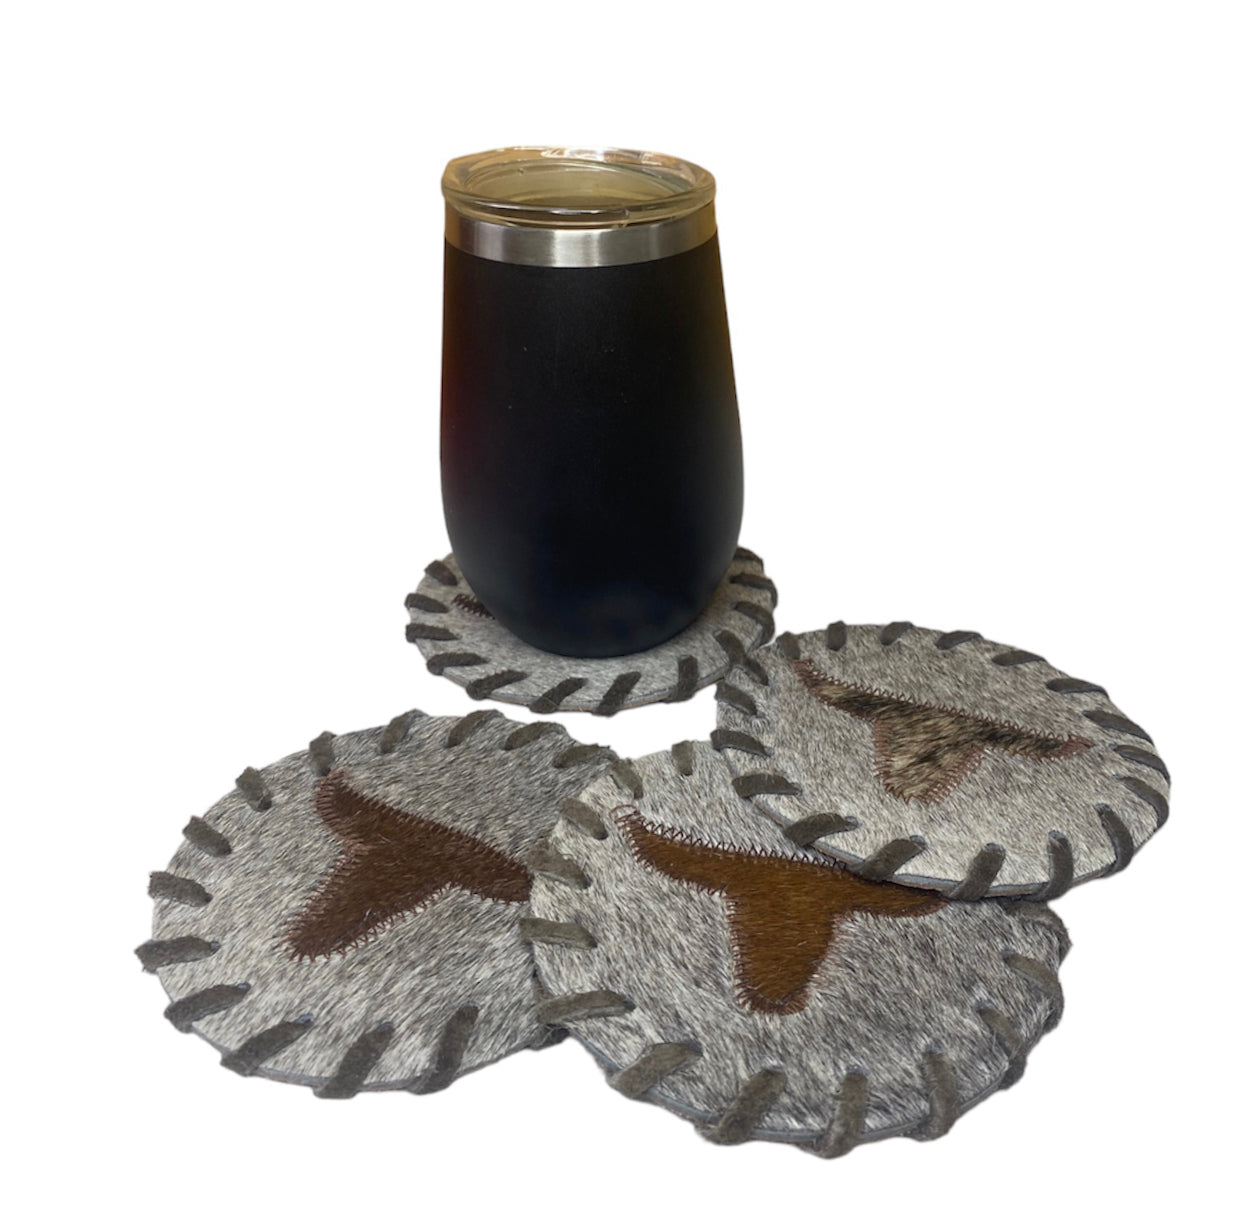 A8390- Steer 100% Hide & Leather Coasters